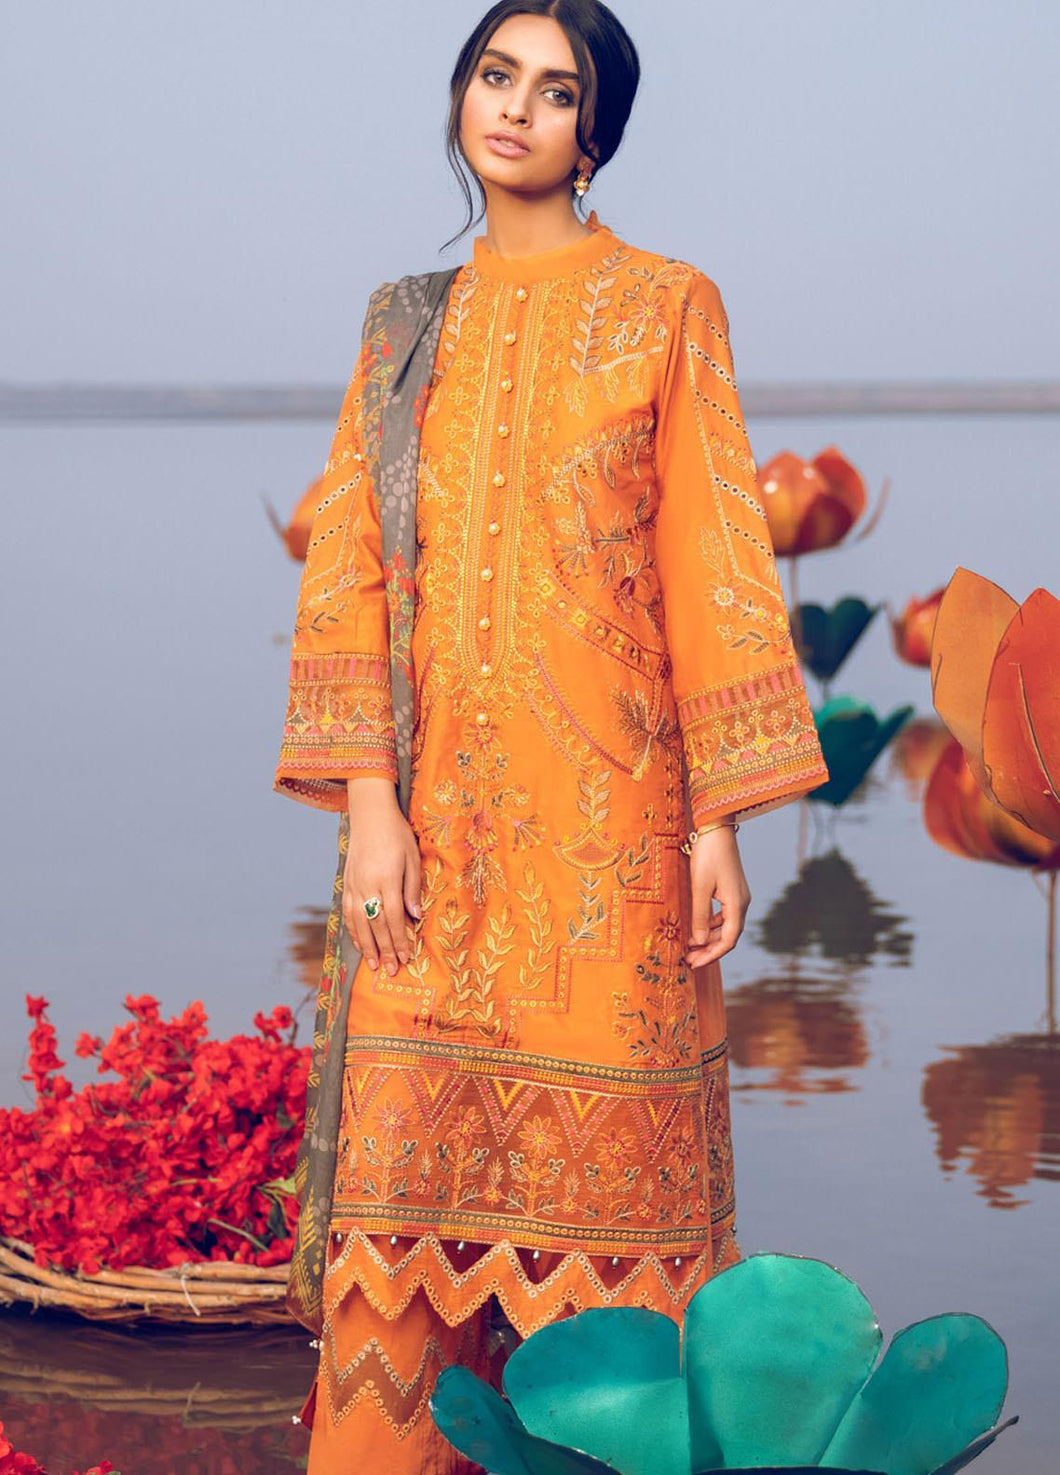 Buy Iznik Luxury Lawn 2021| Zing | 04 Yellow Dress at exclusive rates Buy unstitched or customized dresses of IZNIK LAWN 2021, MARIA B M PRINT OFFICIAL IMROZIA UNSTITCHED Gulal dresses of Evening wear, Party wear and NIKAH OUTFITS ASIAN PARTY WEAR Dresses can be available easily at USA & UK at best price in Sale!